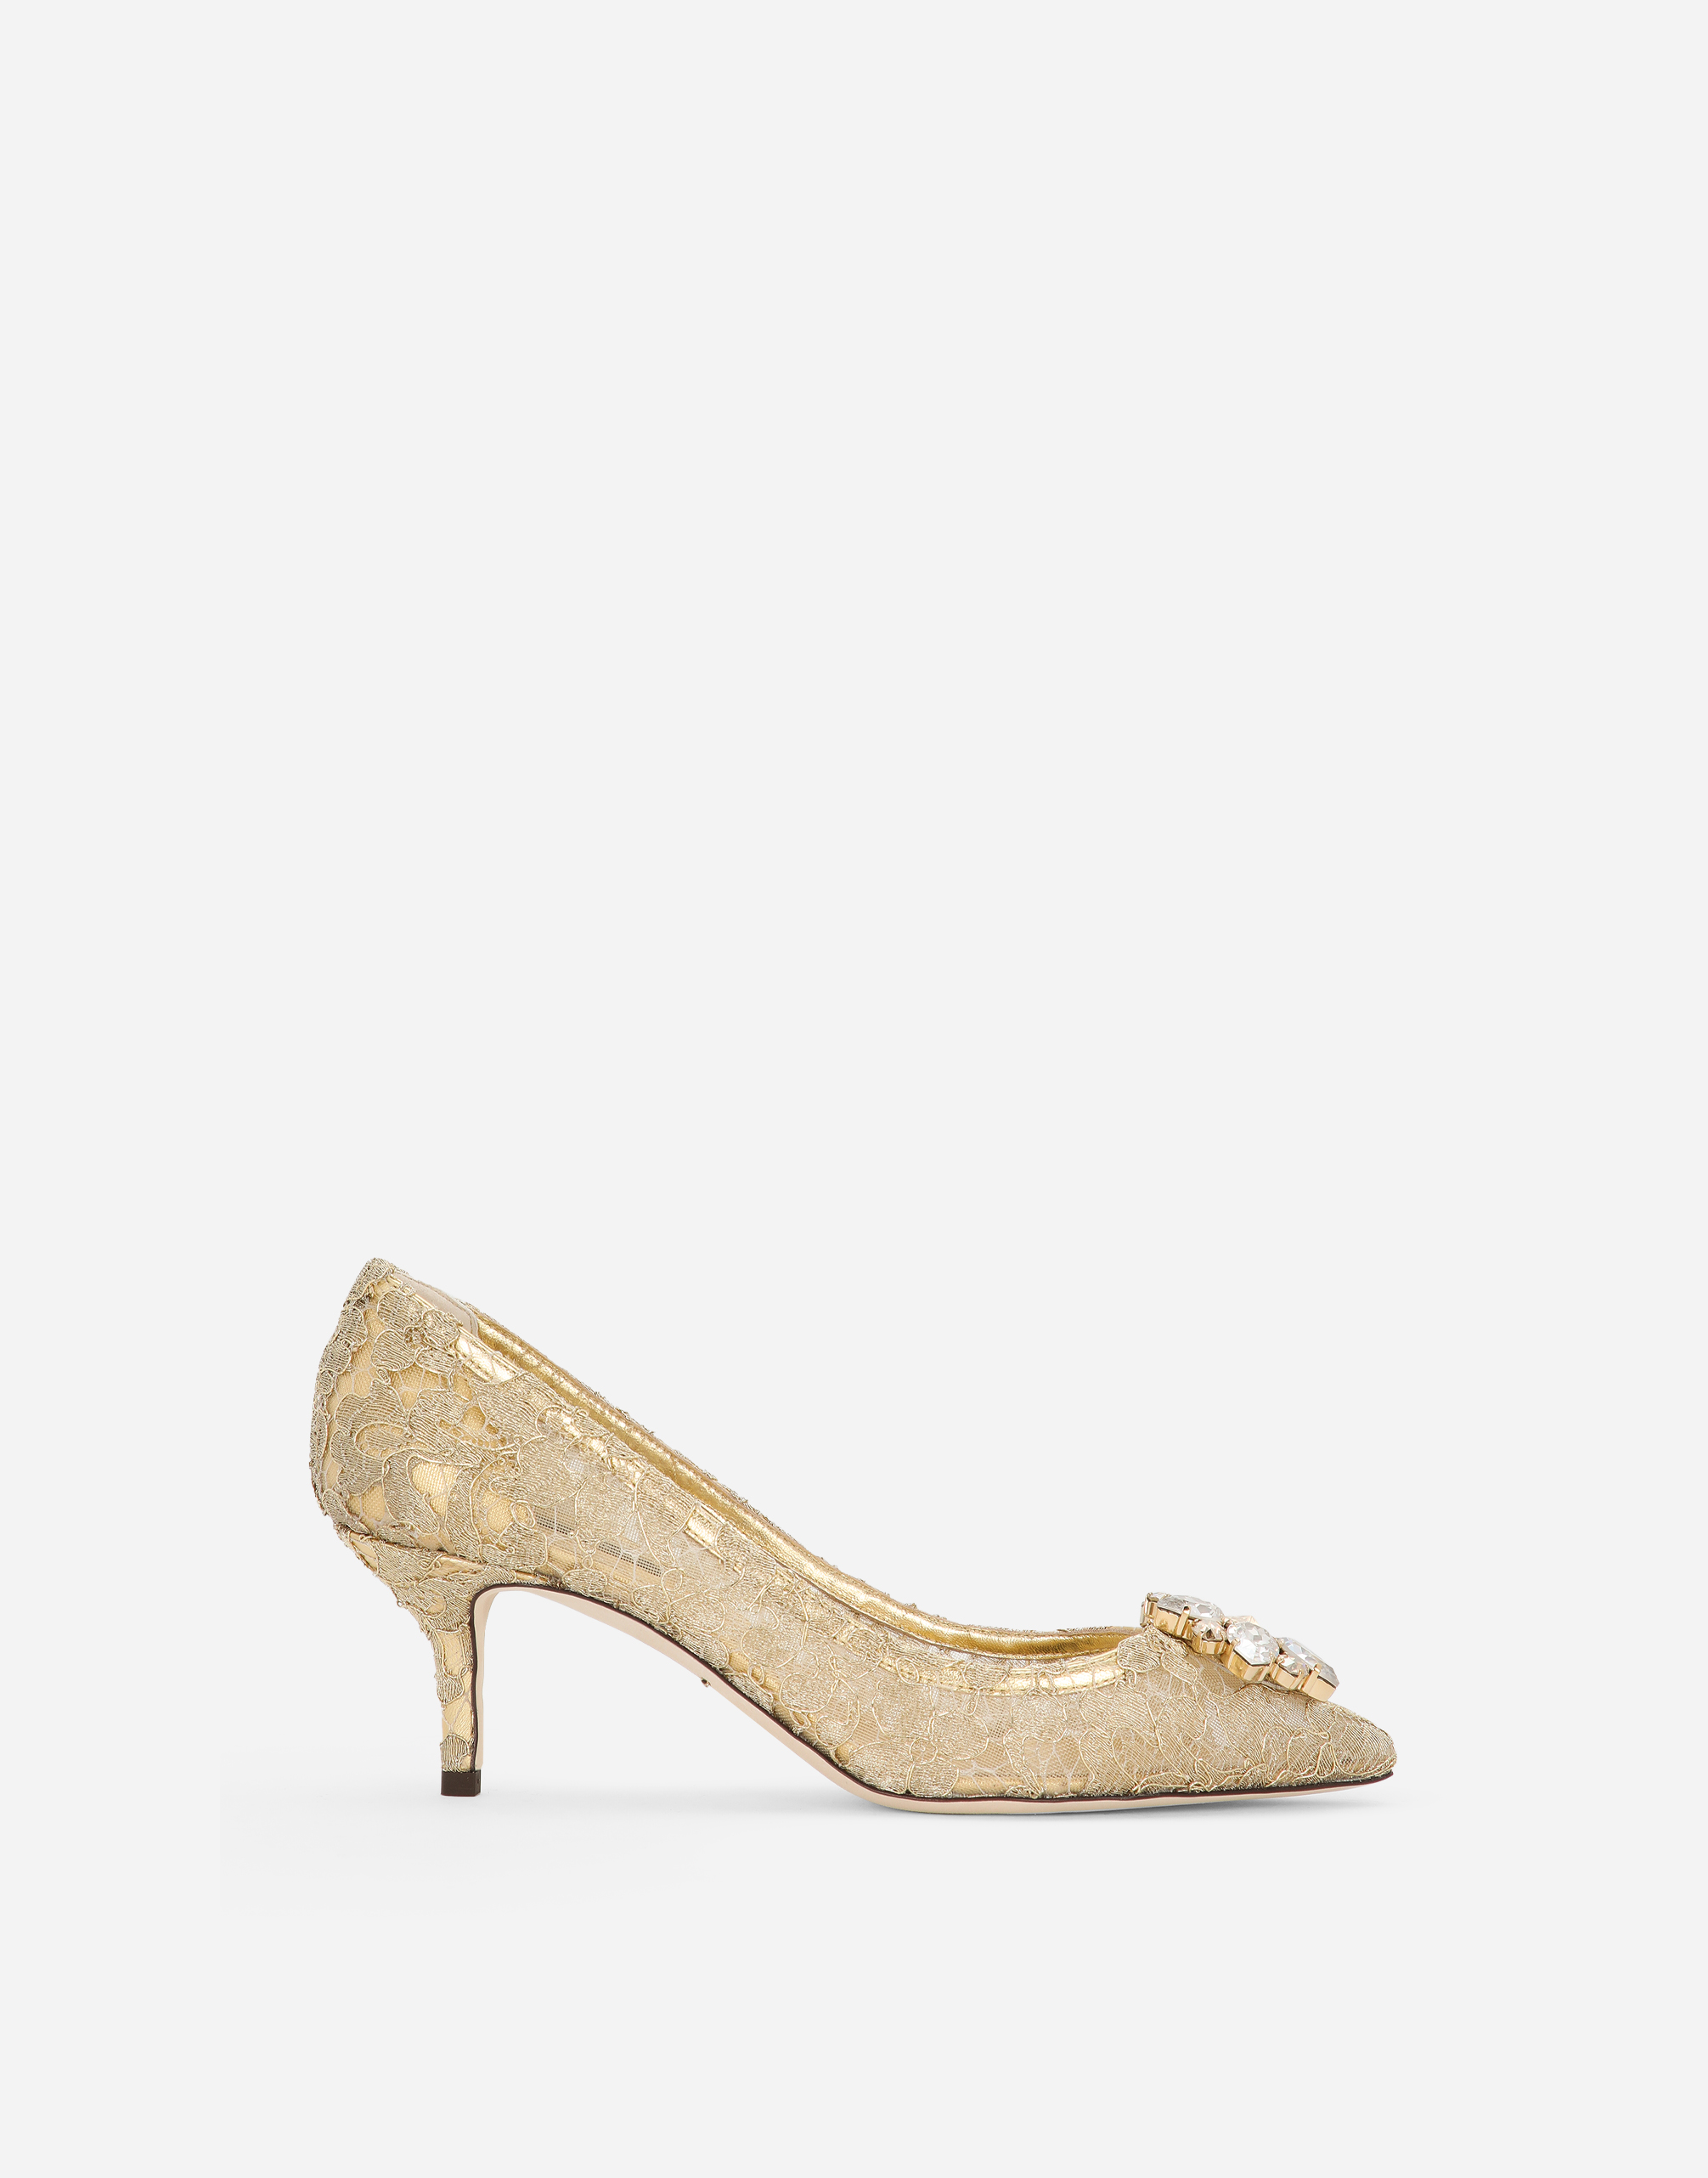 Lurex lace rainbow pumps with brooch detailing in Gold